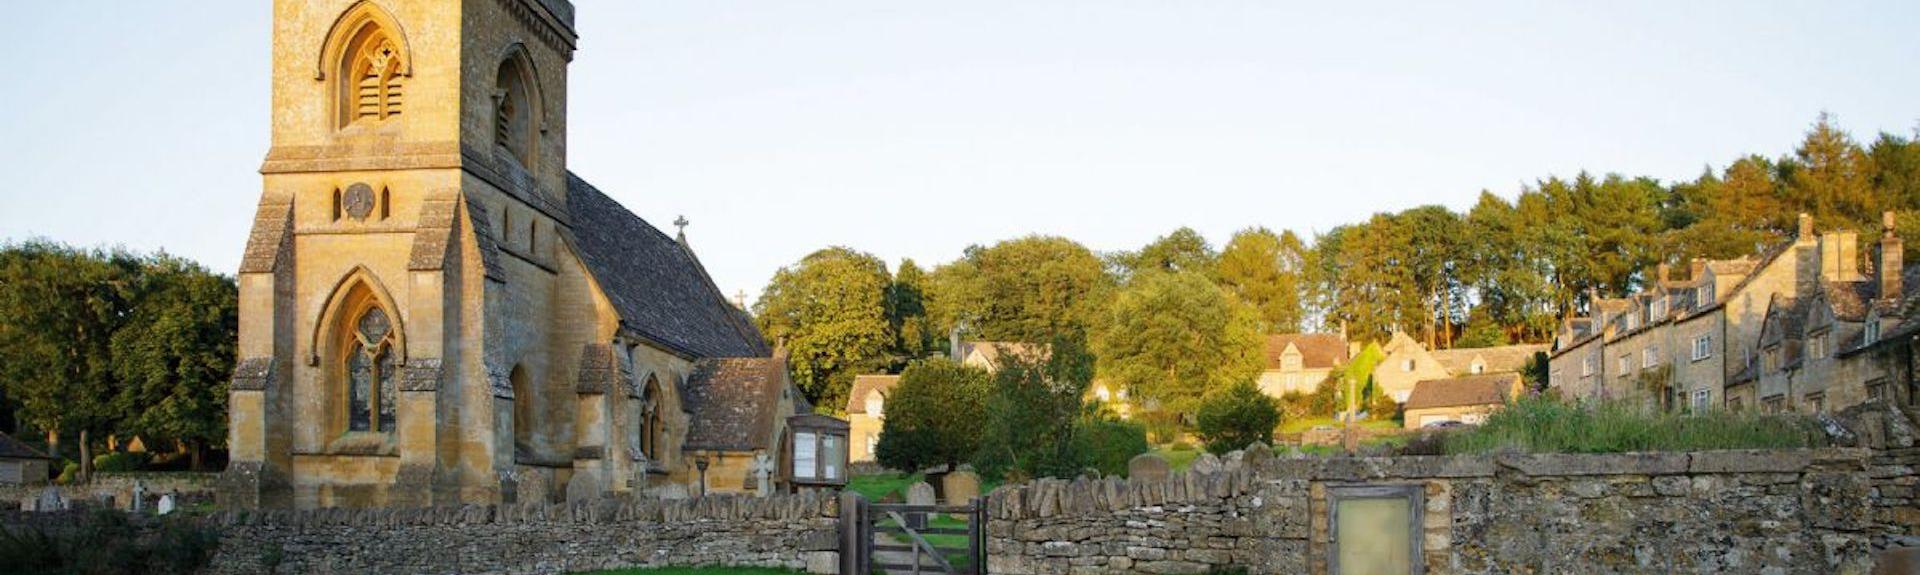 A Cotswold church and a cluster of honeystone cottages.